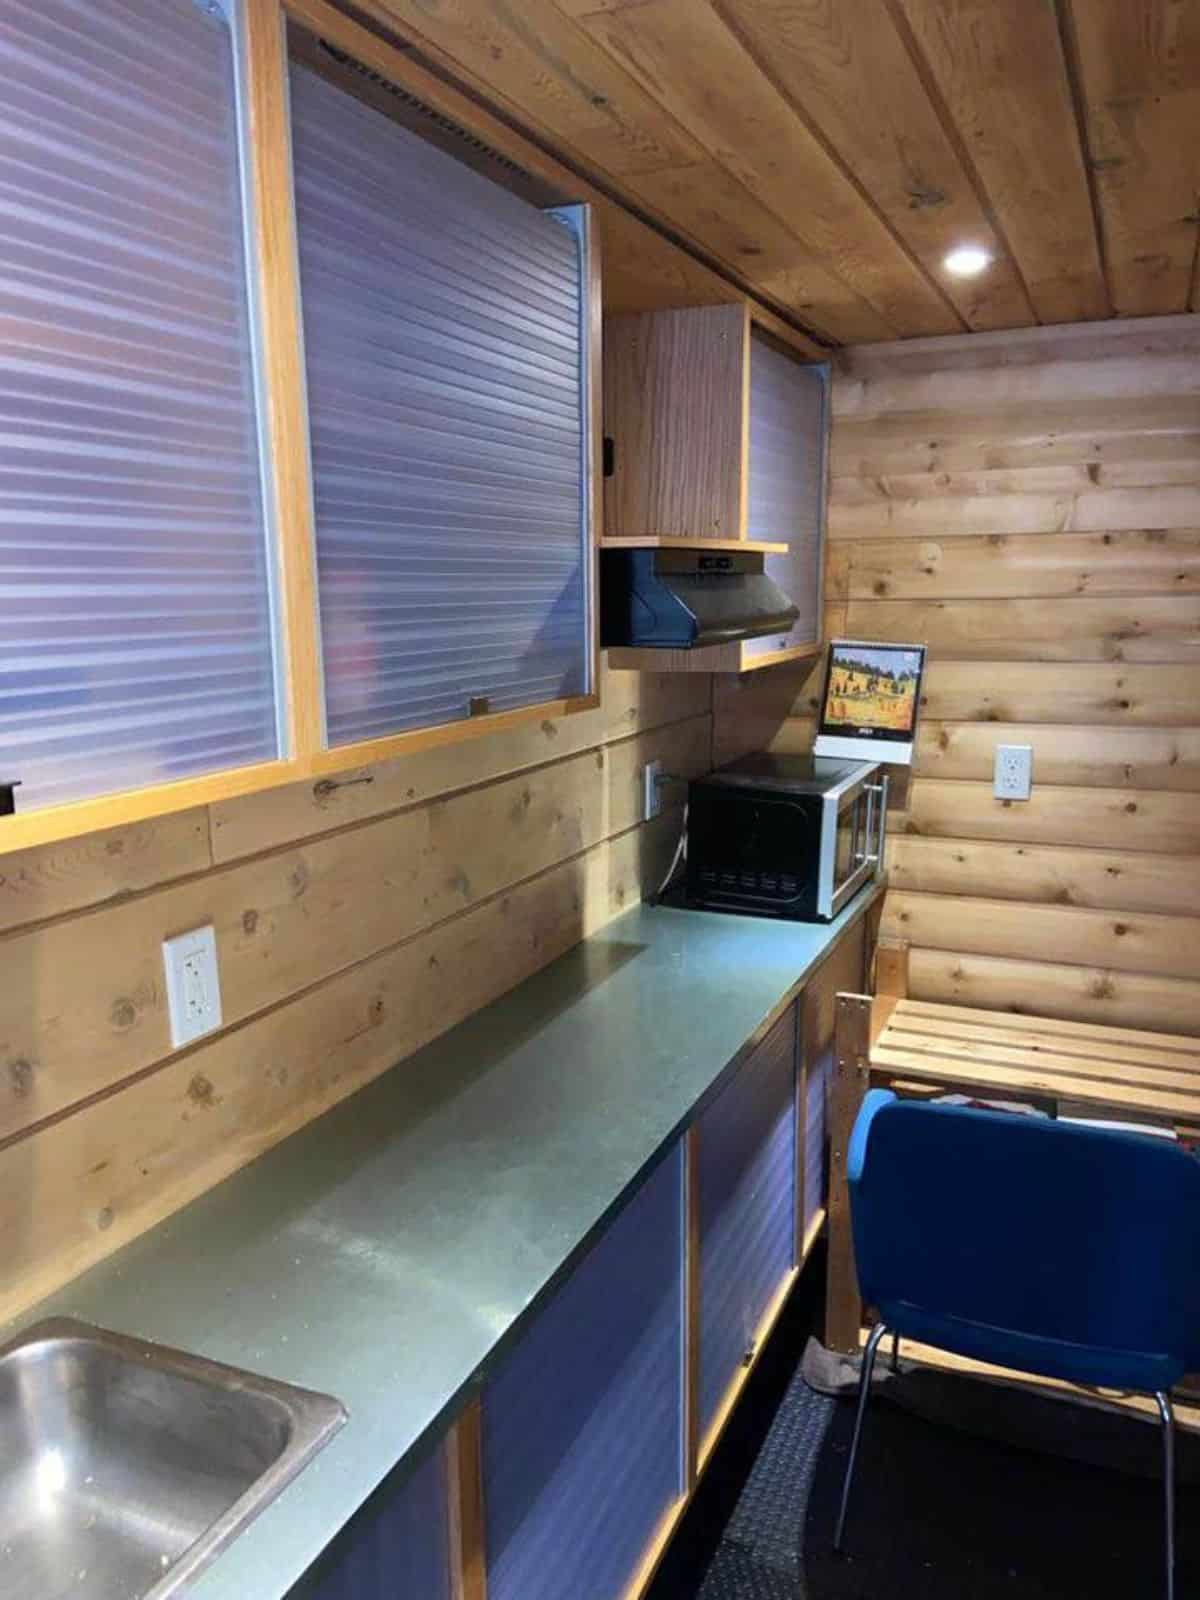 kitchen area of the tiny house